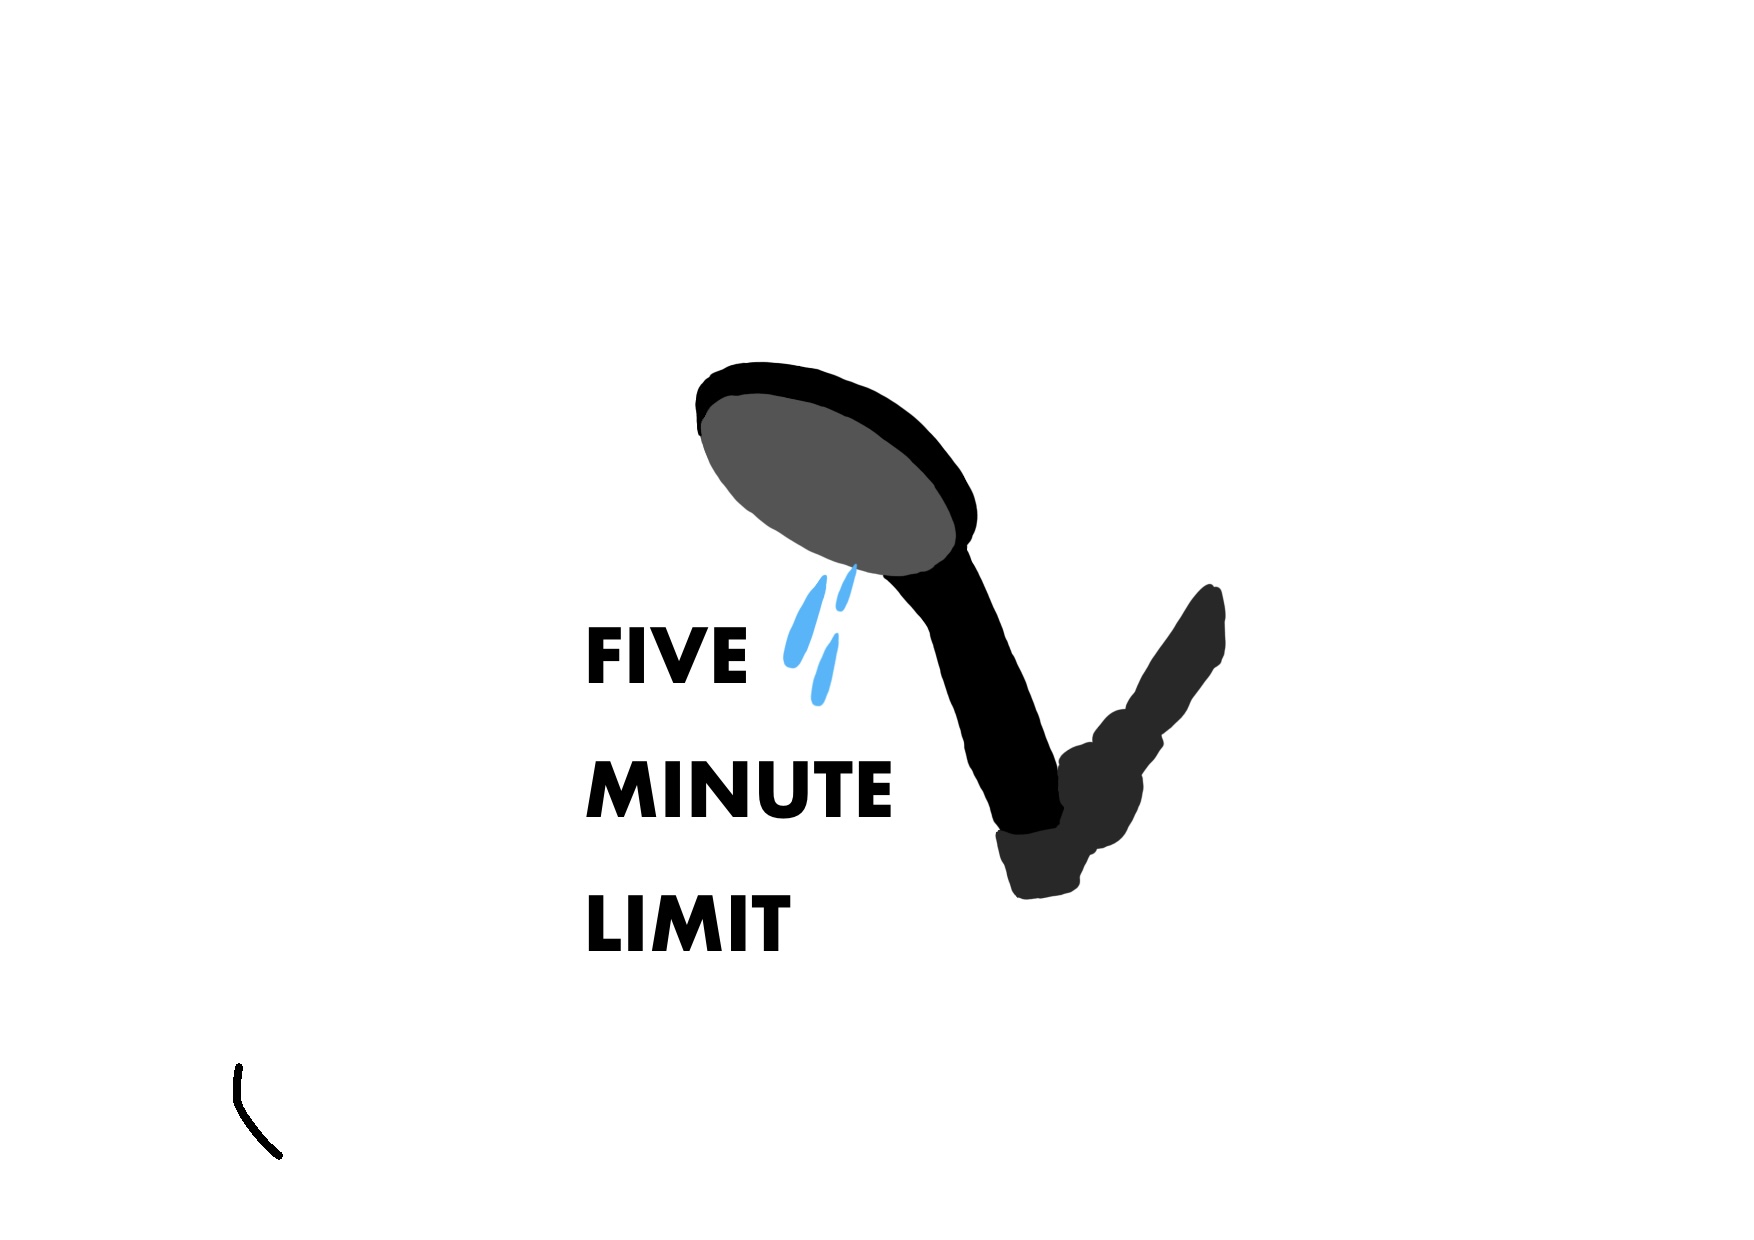 Shower head leaking with text “Five Minute Limit”